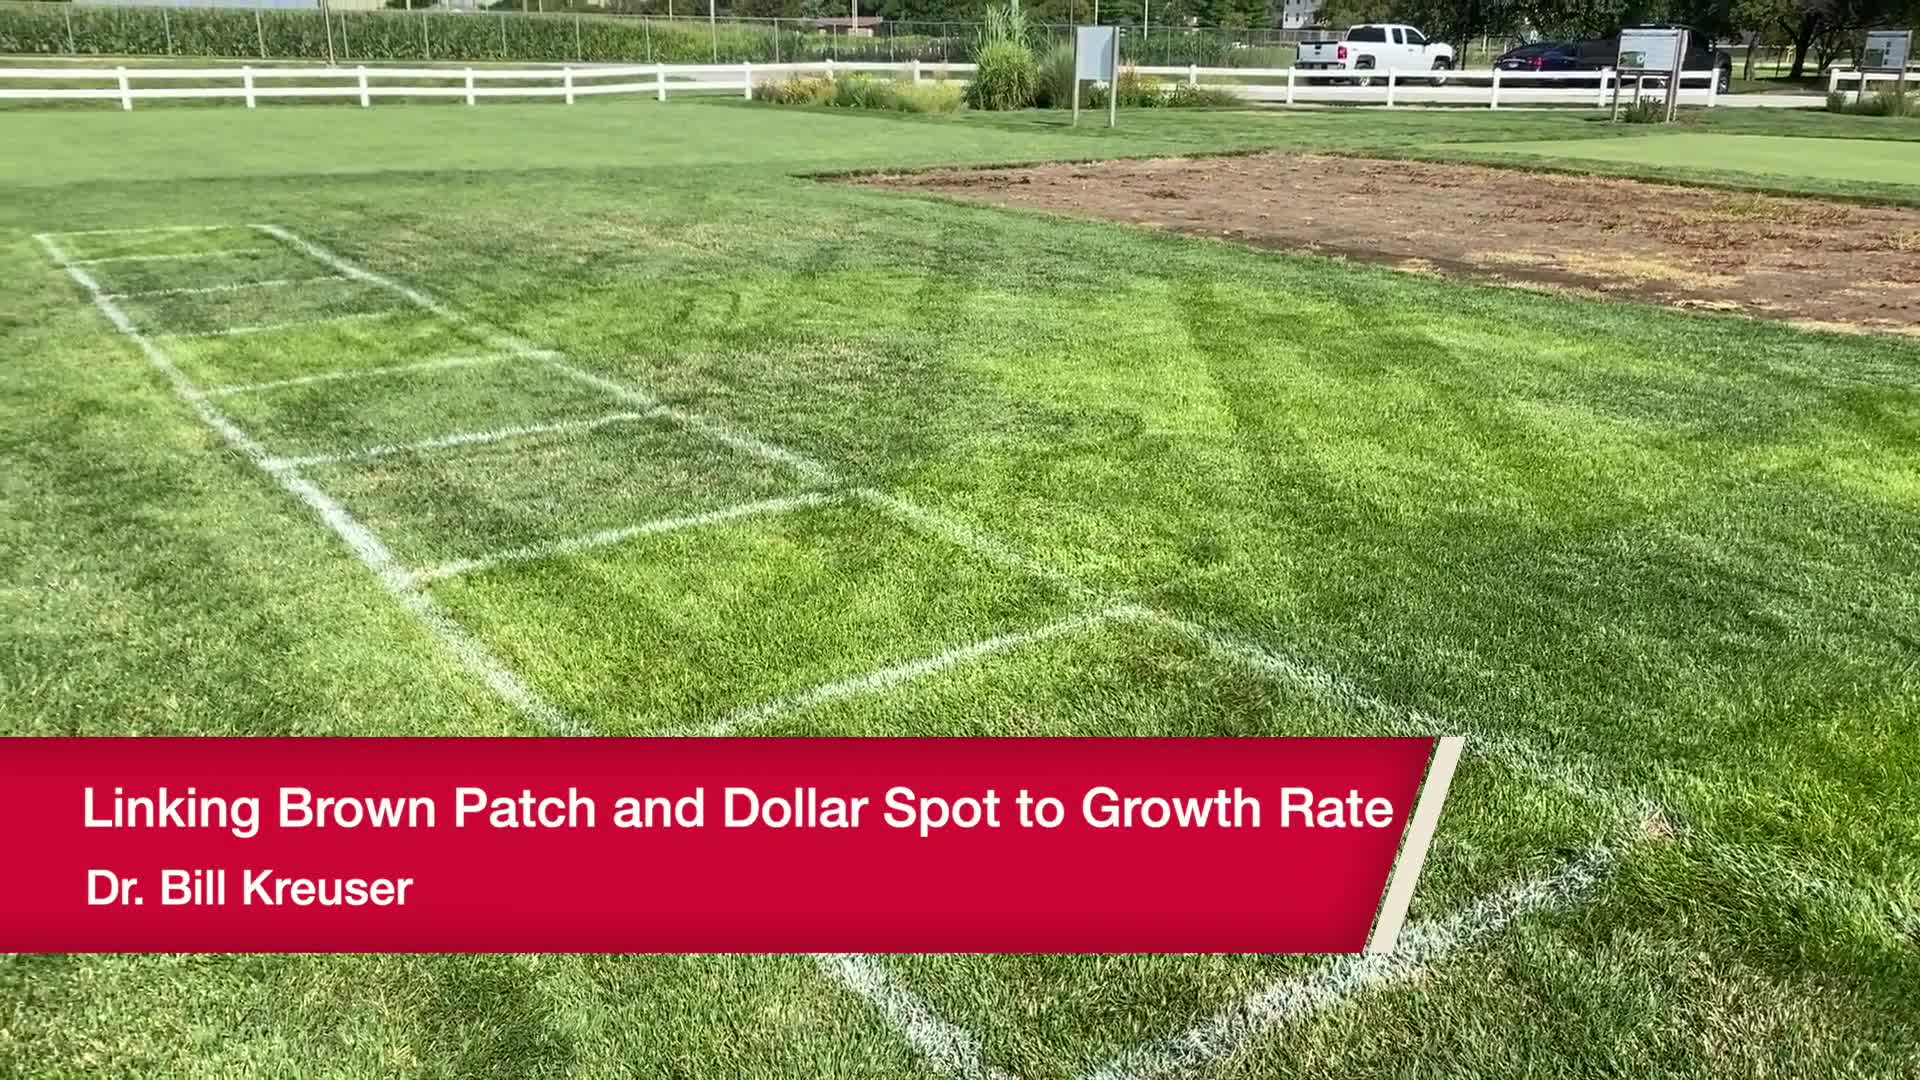 Linking Brown Patch and Dollar Spot to Growth Rate